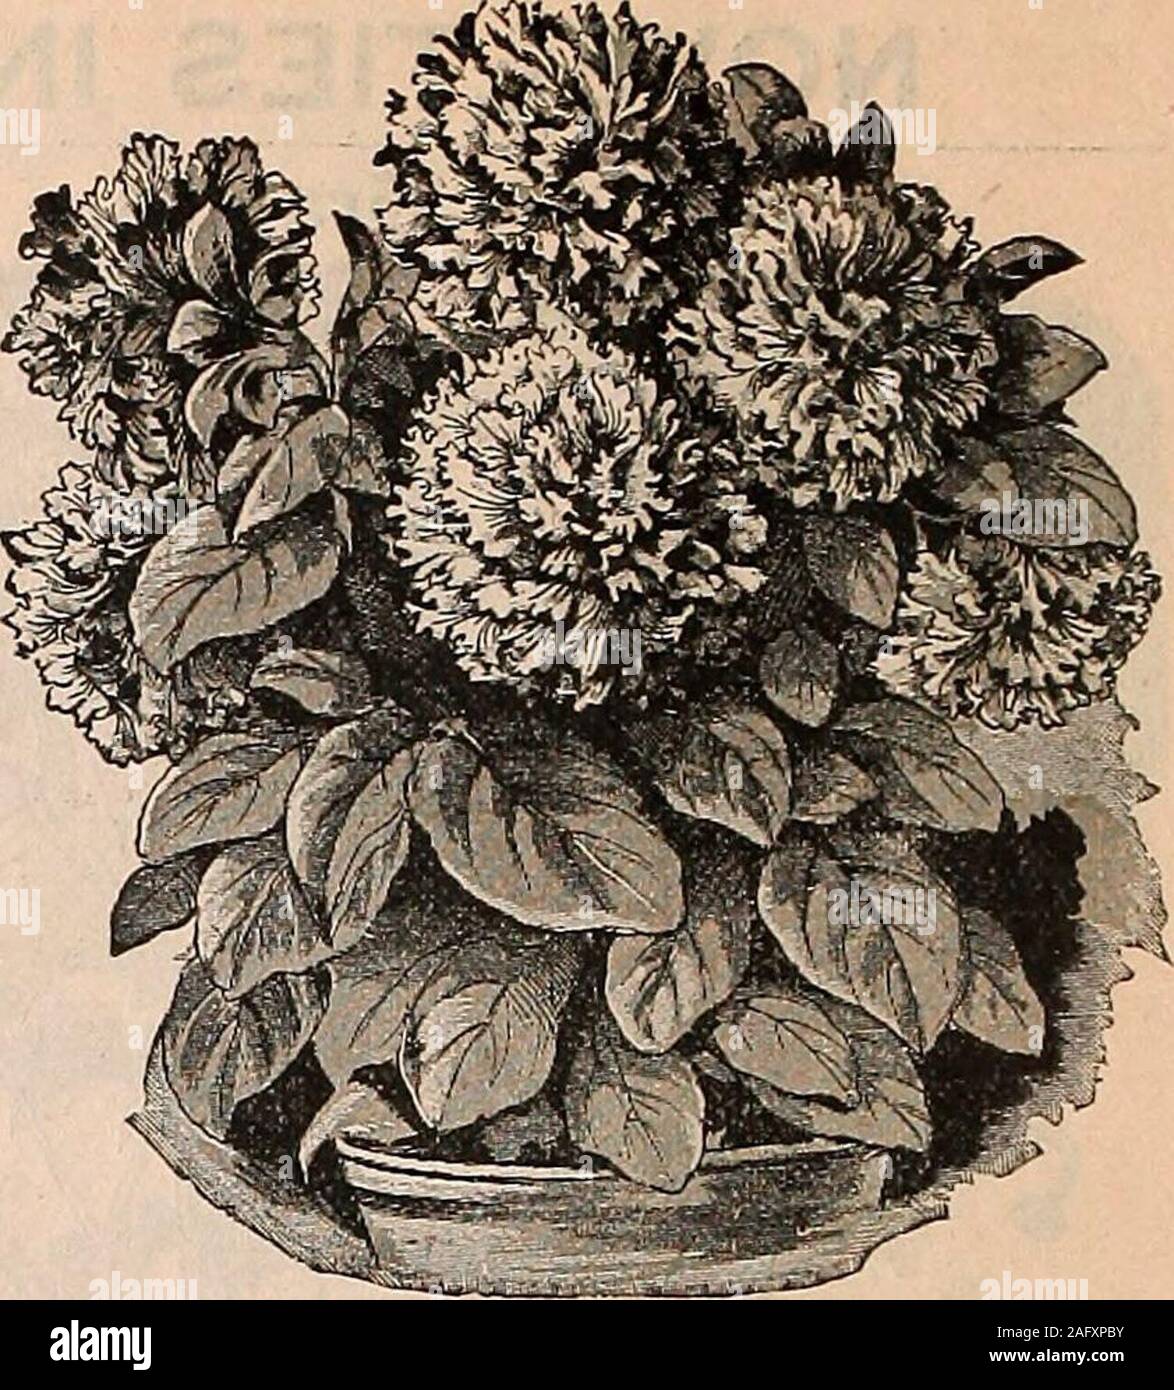 . Catalogue of vegetable and flower seeds : catalogues free to all. rf variety of Sunflower. The plants form regular compact bushes,that measure when fully developed about 10 to 12 inches in height and 14 to 16 inches in diameter.Above the dark-green small leaves are borne on wiry strong stems the single ray floret flowers, of apretty yellow color, while the centre of the flower is black. Helianthus Perkeo will prove to be a veryvaluable addition where cut flowers are in demand. The uninterruptedly long flowering season, fromthe end of June until killed bv frost, will make it valuable for plan Stock Photo